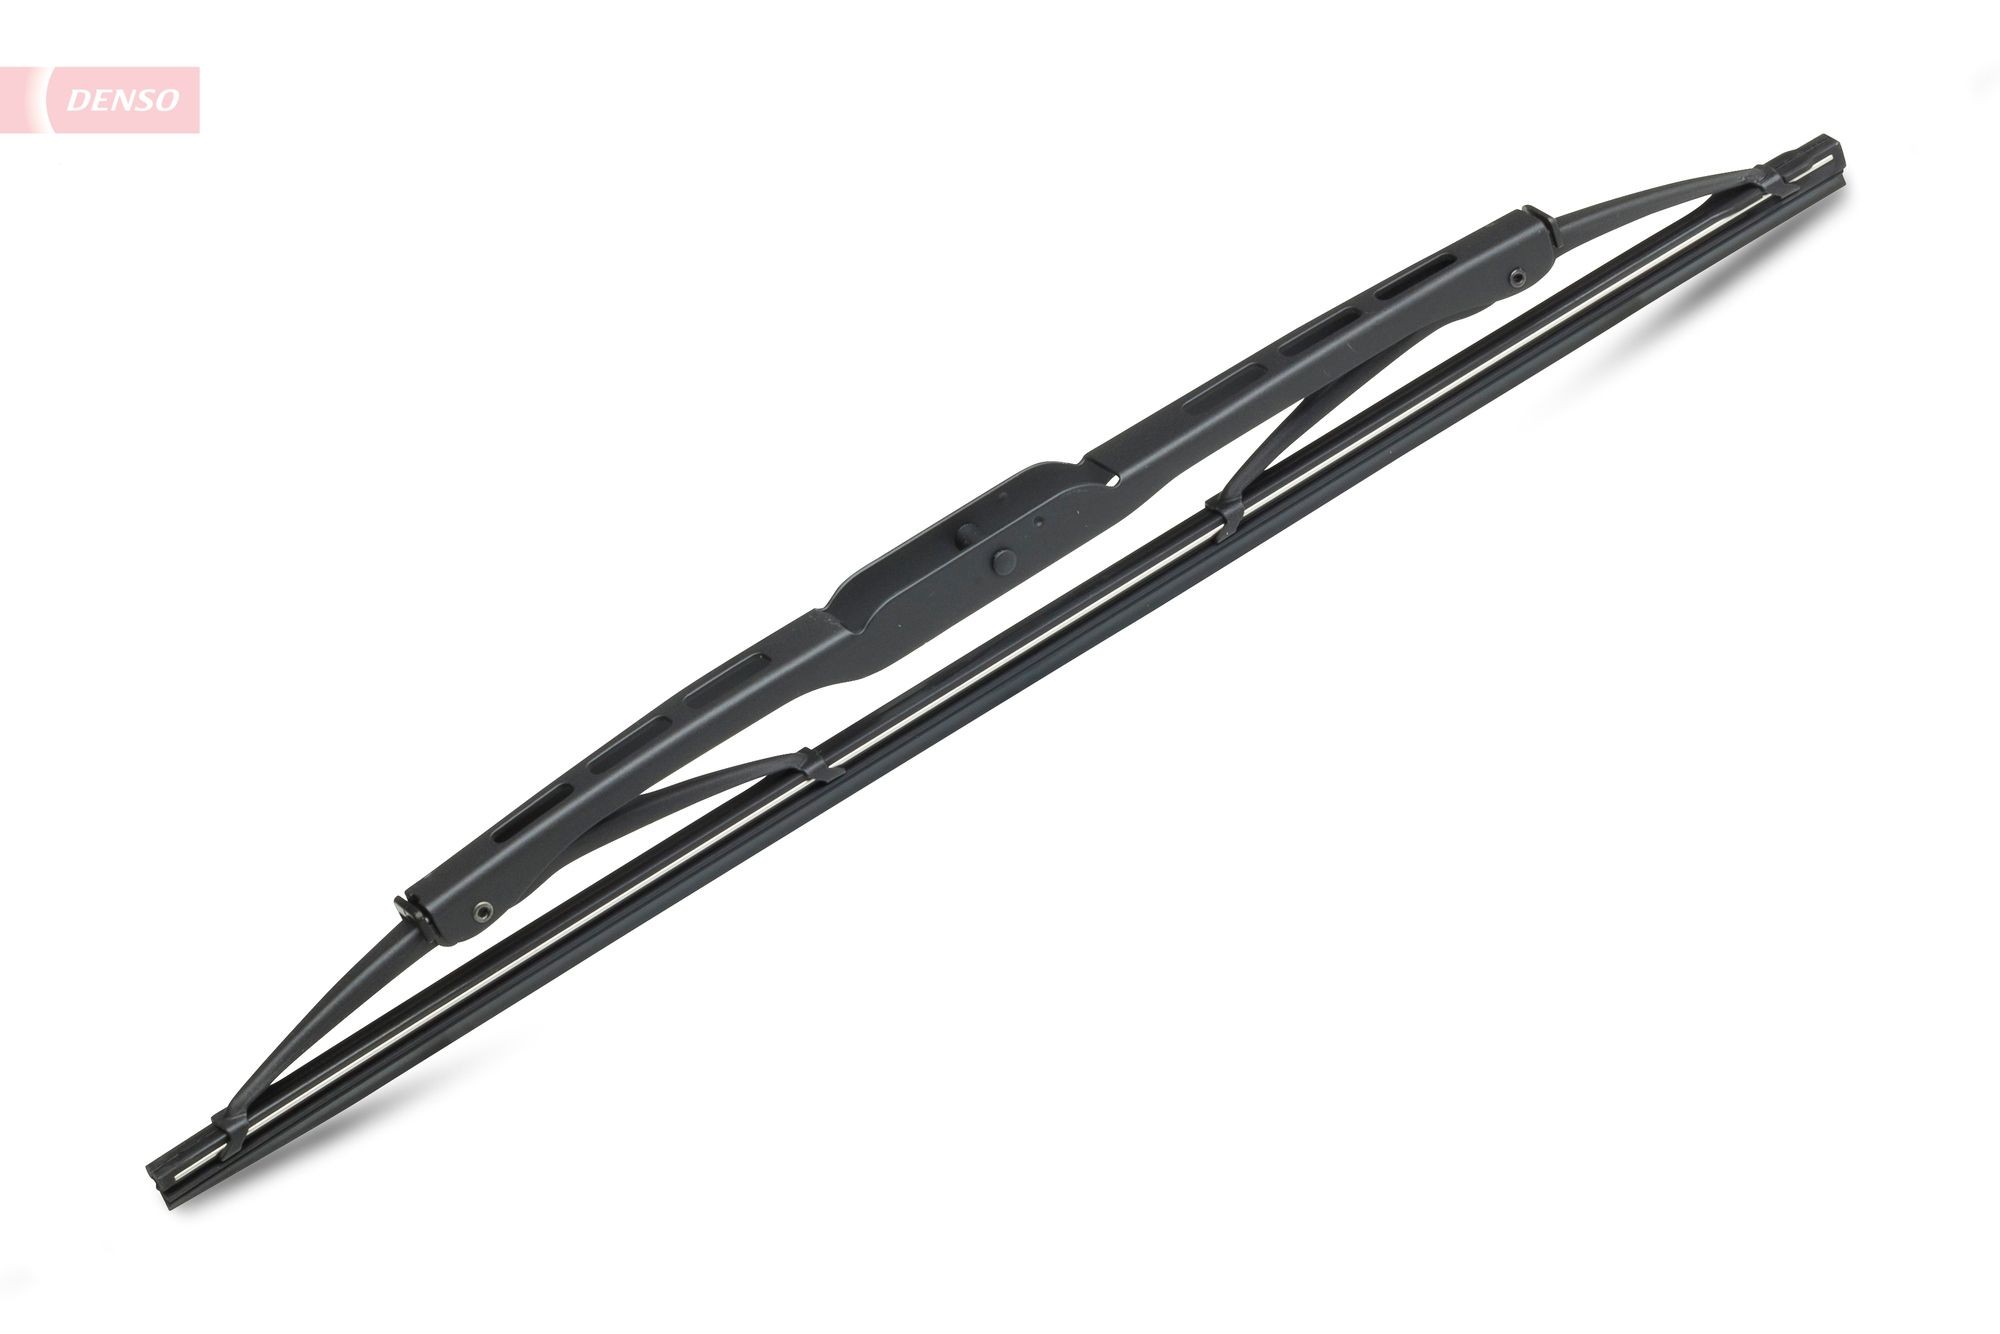 Wiper blade DM-035 from DENSO